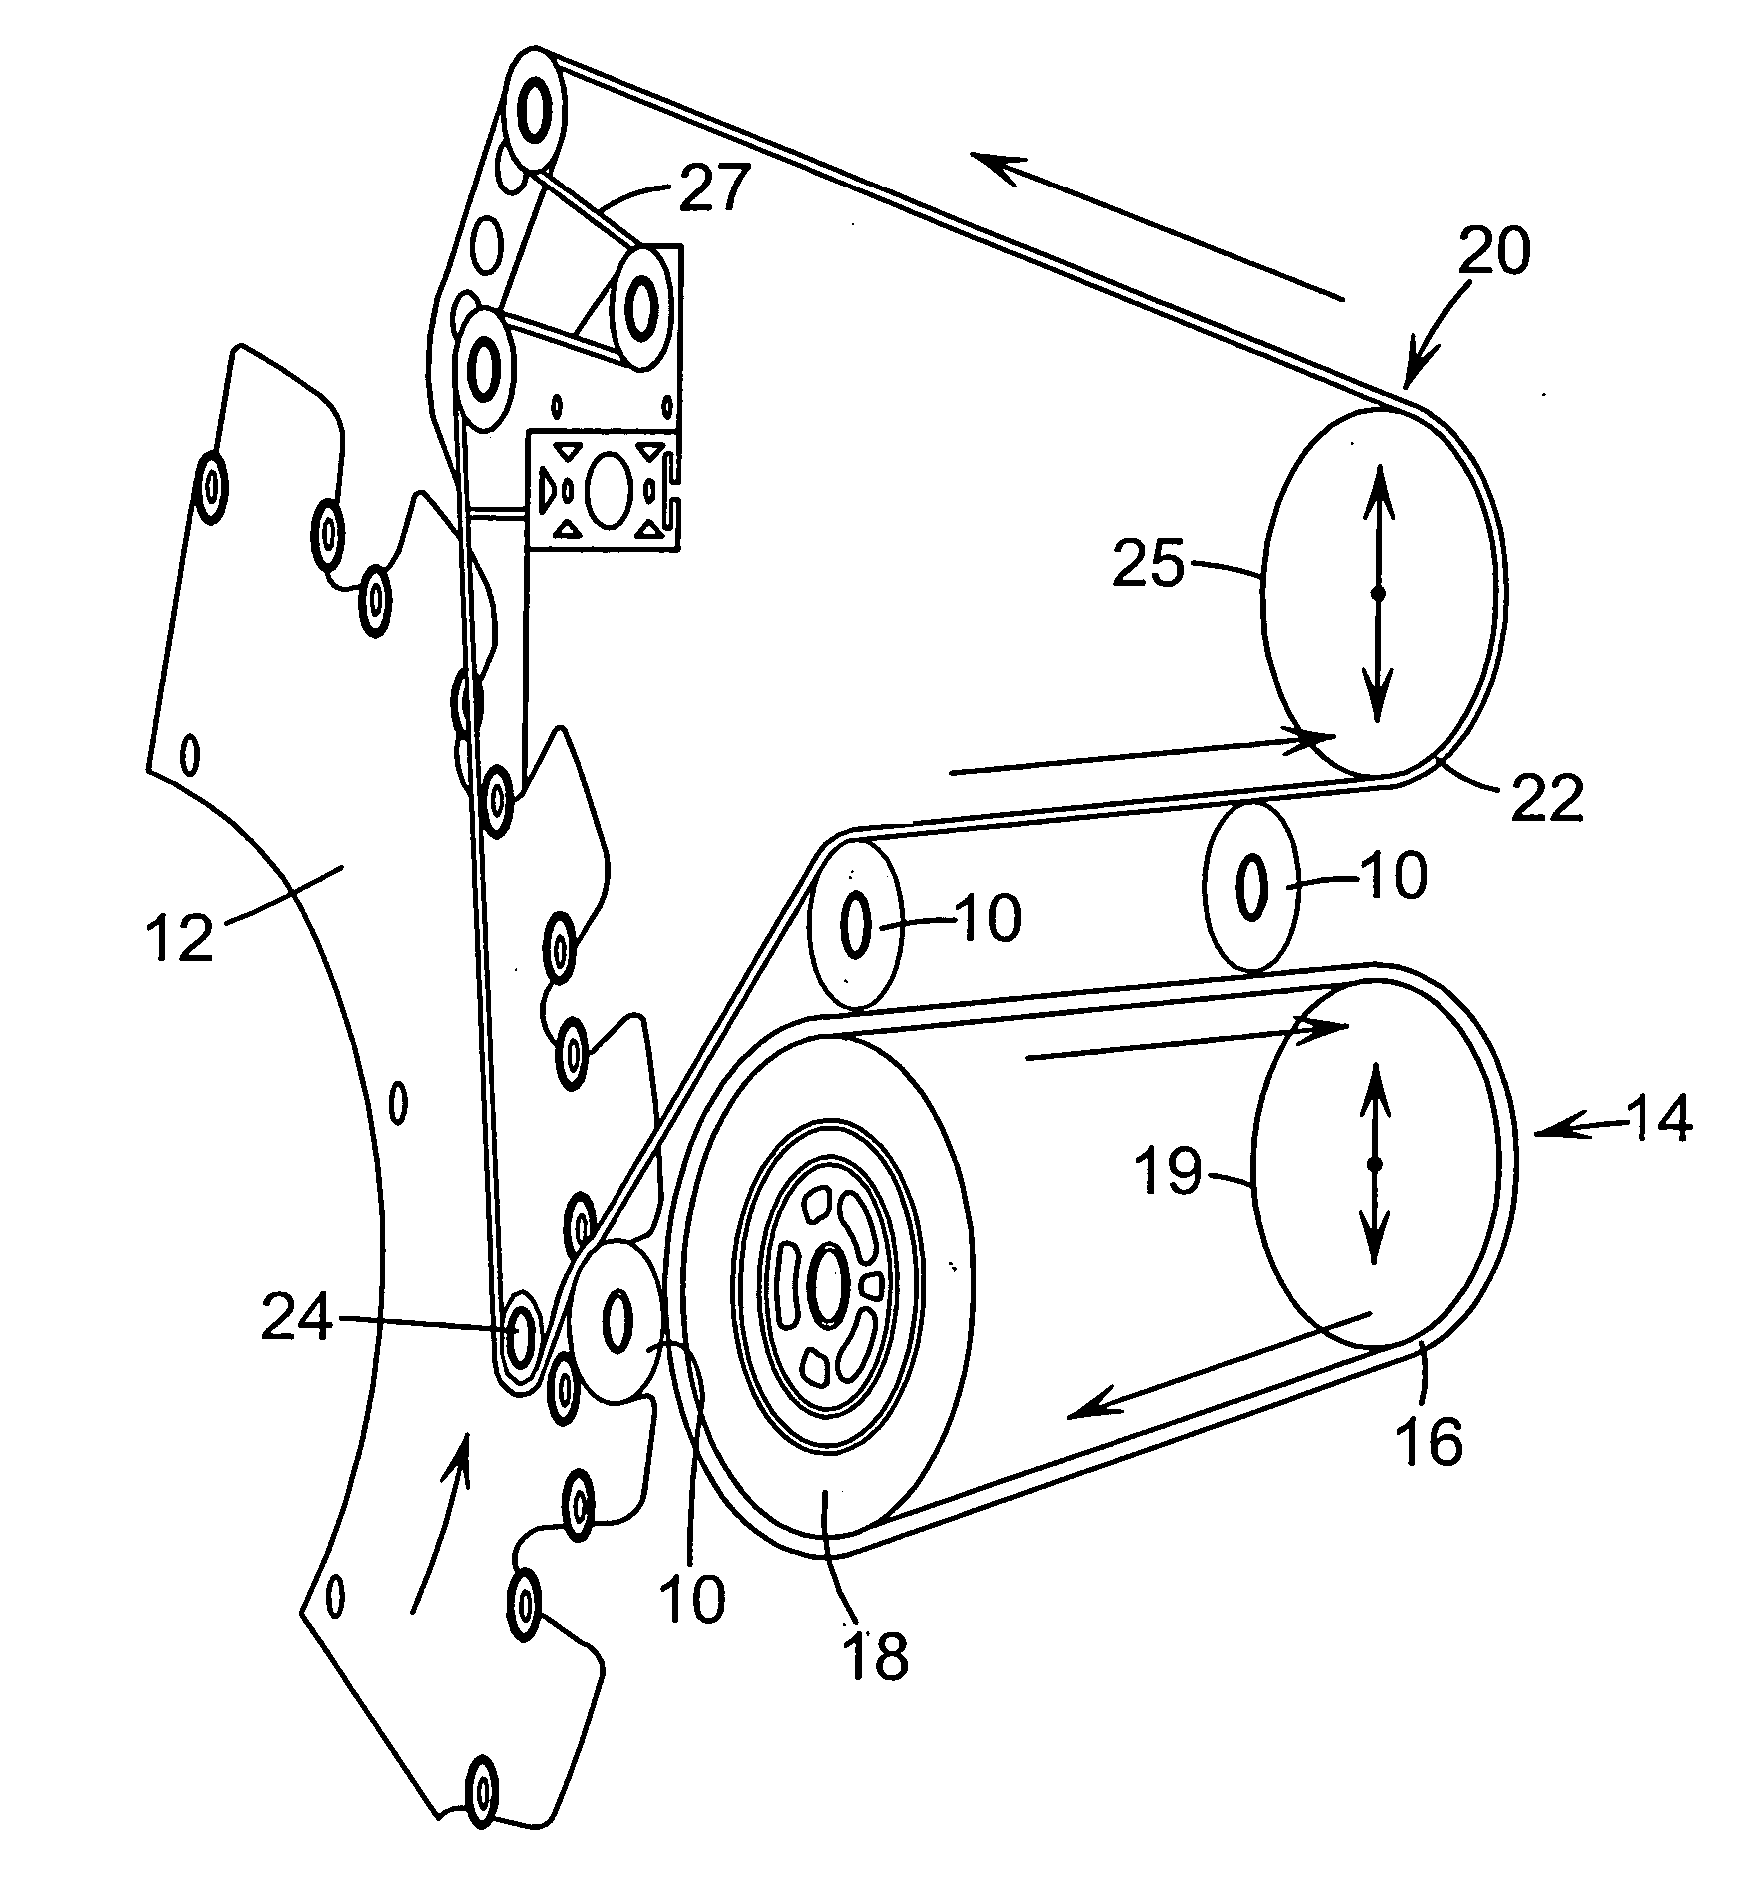 Outfeed mechanism for starwheel type glass inspection machine